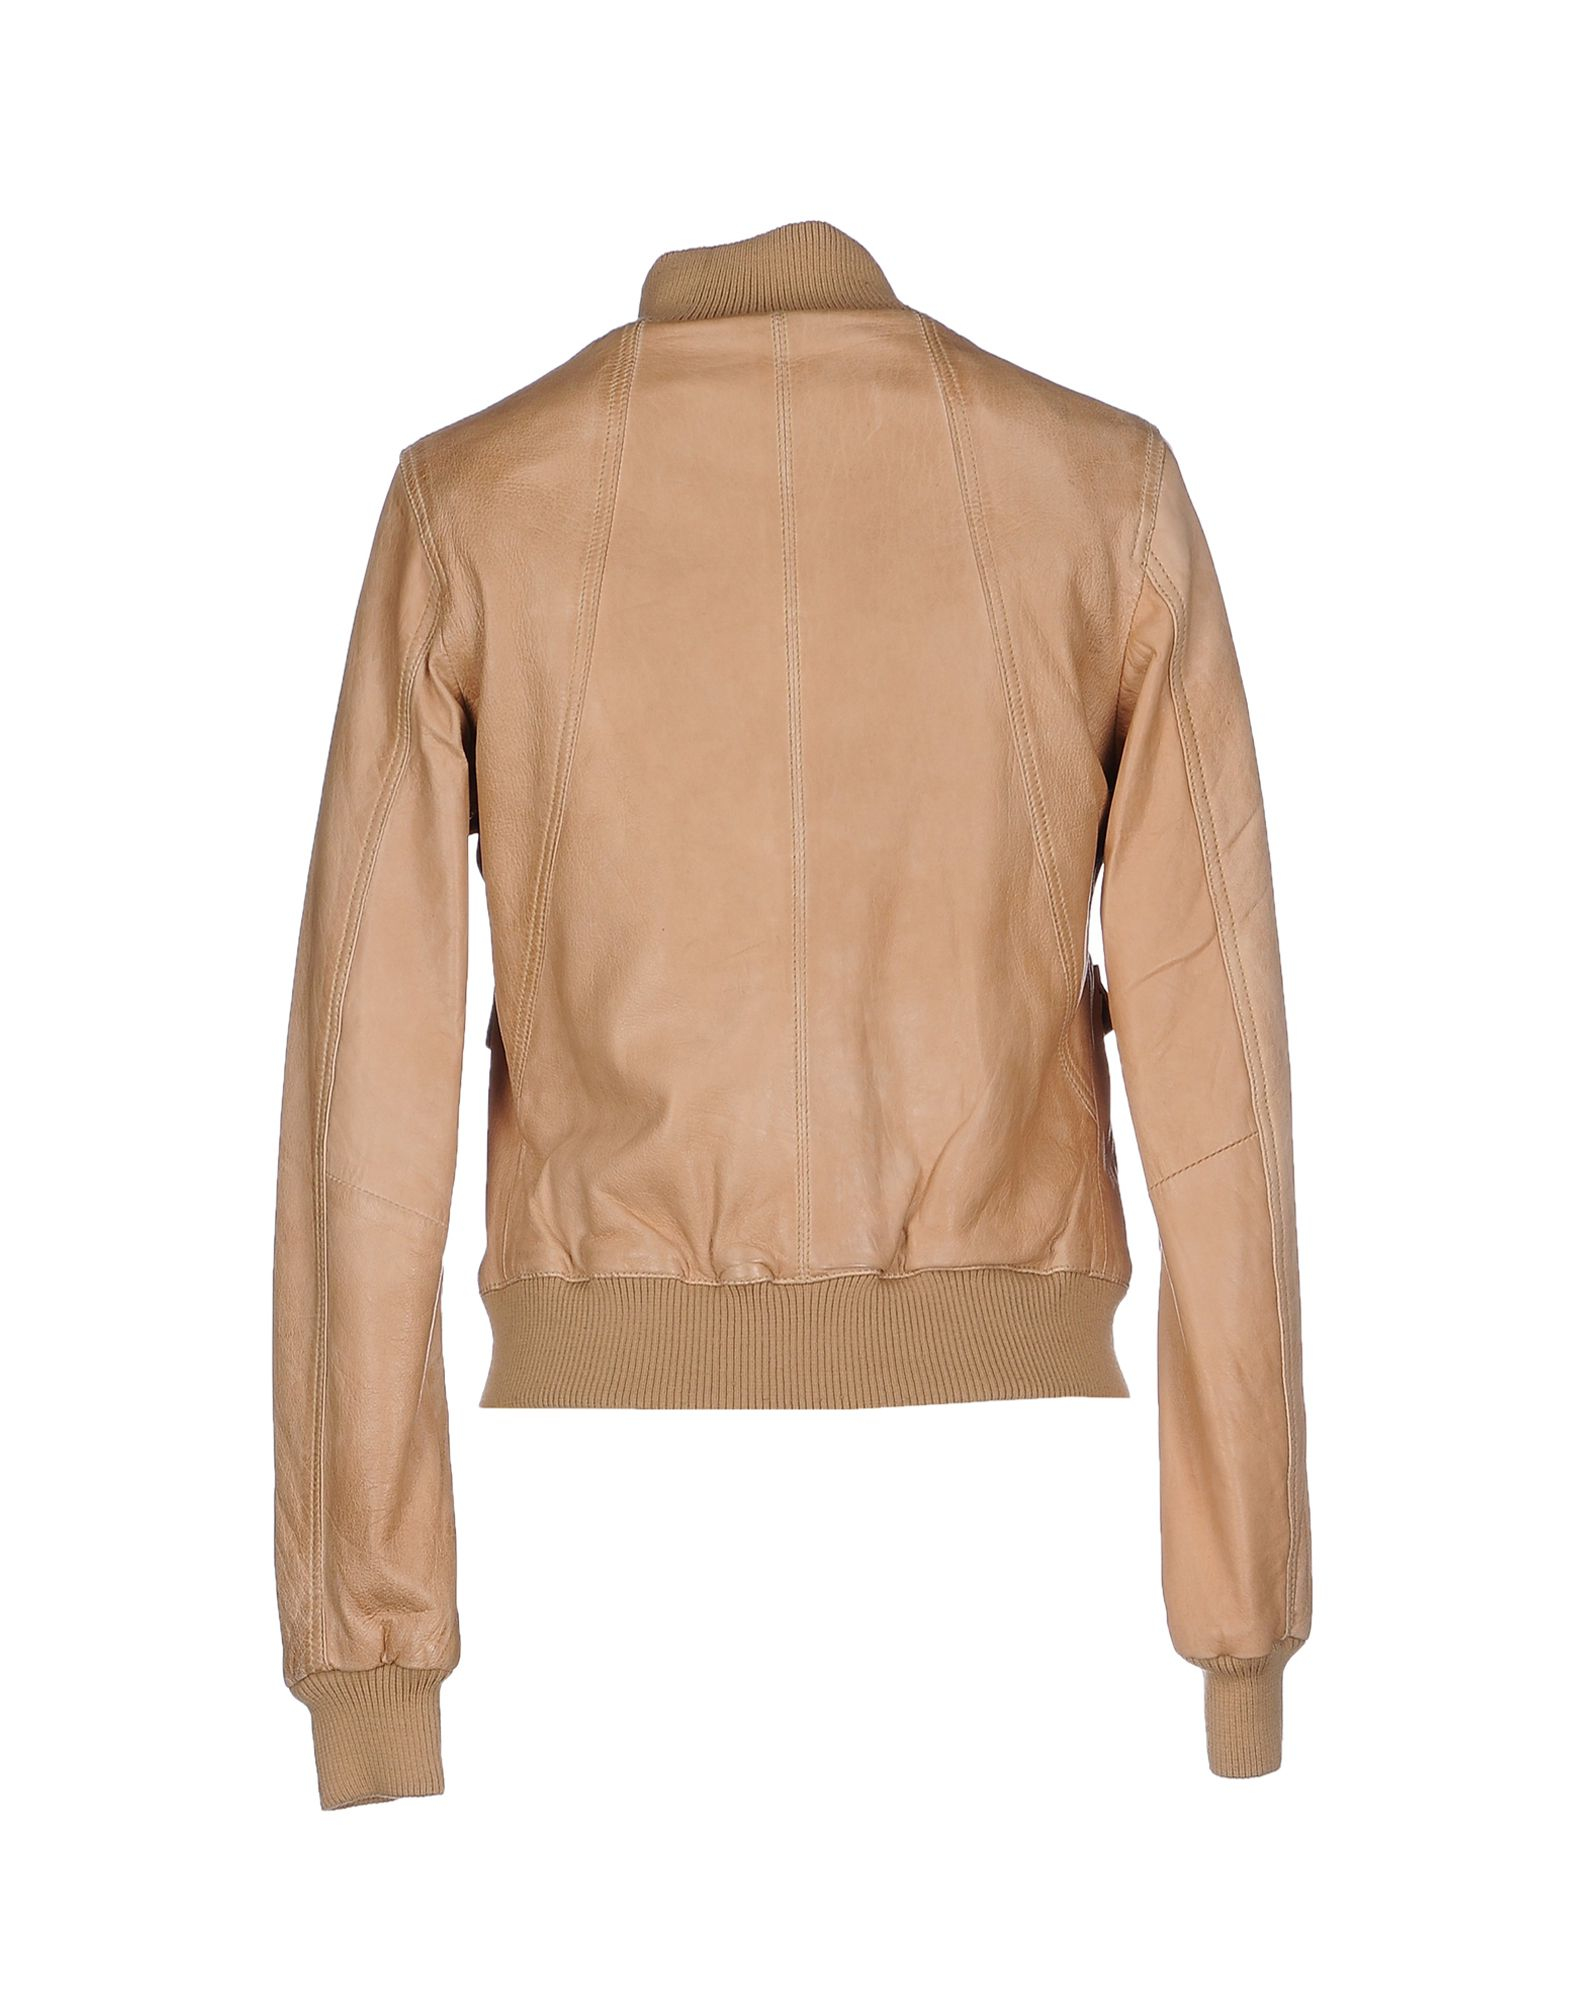 Le Sentier Leather Jacket in Sand (Natural) - Lyst